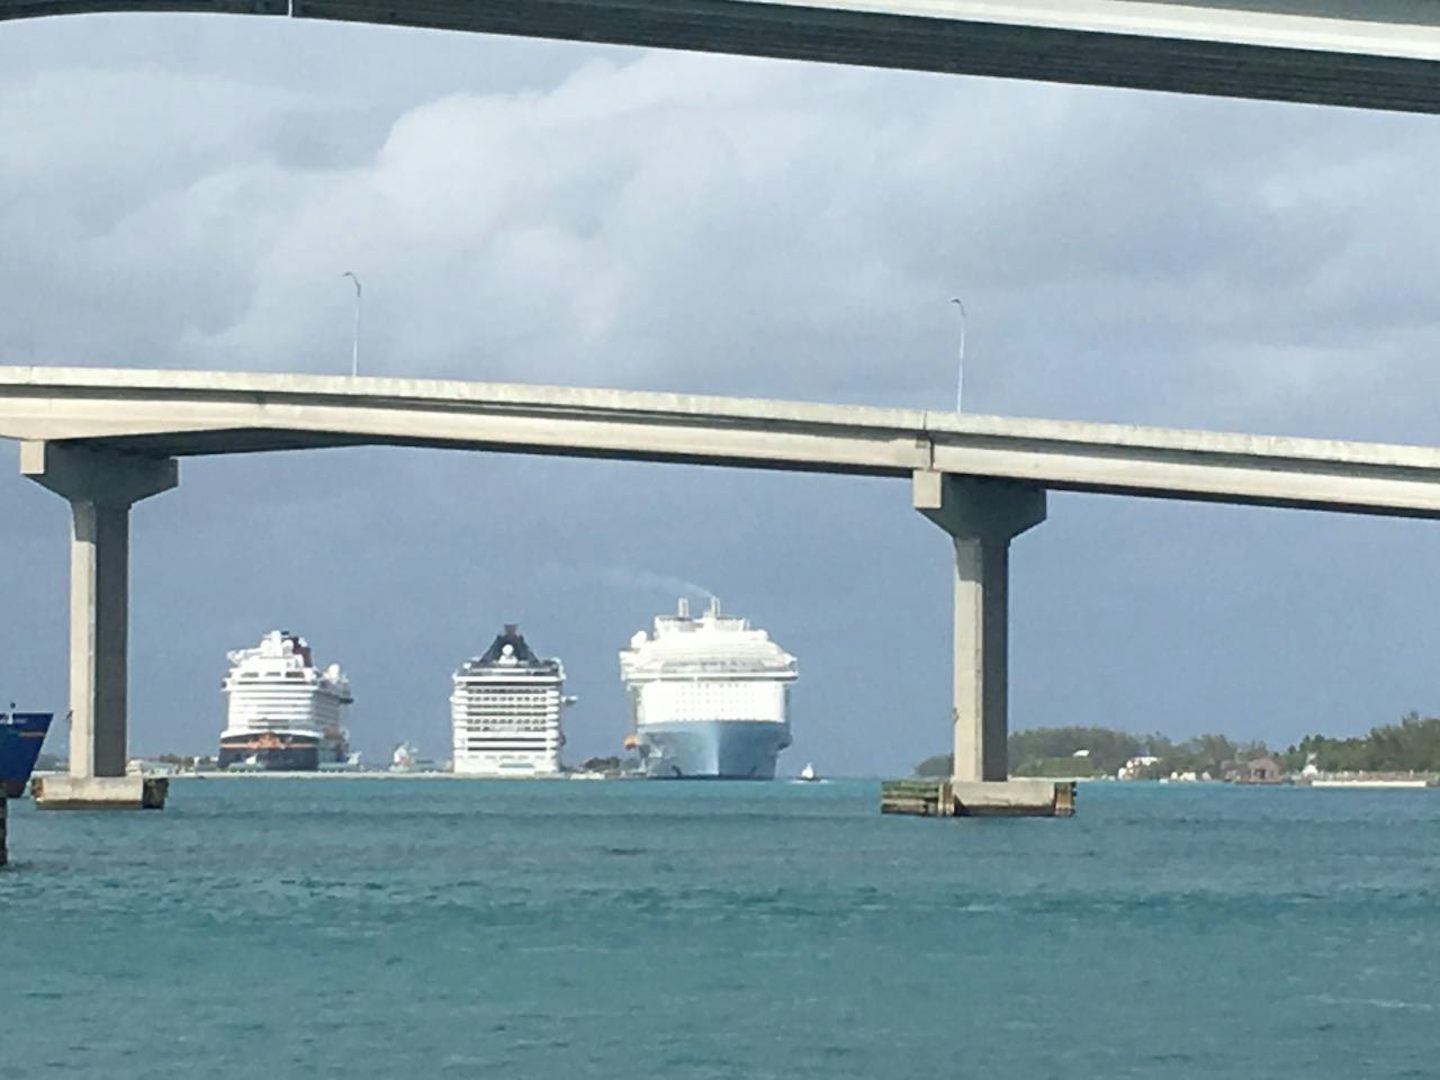 Harmony of the Seas is the one on the right!! The mother of all ships!!